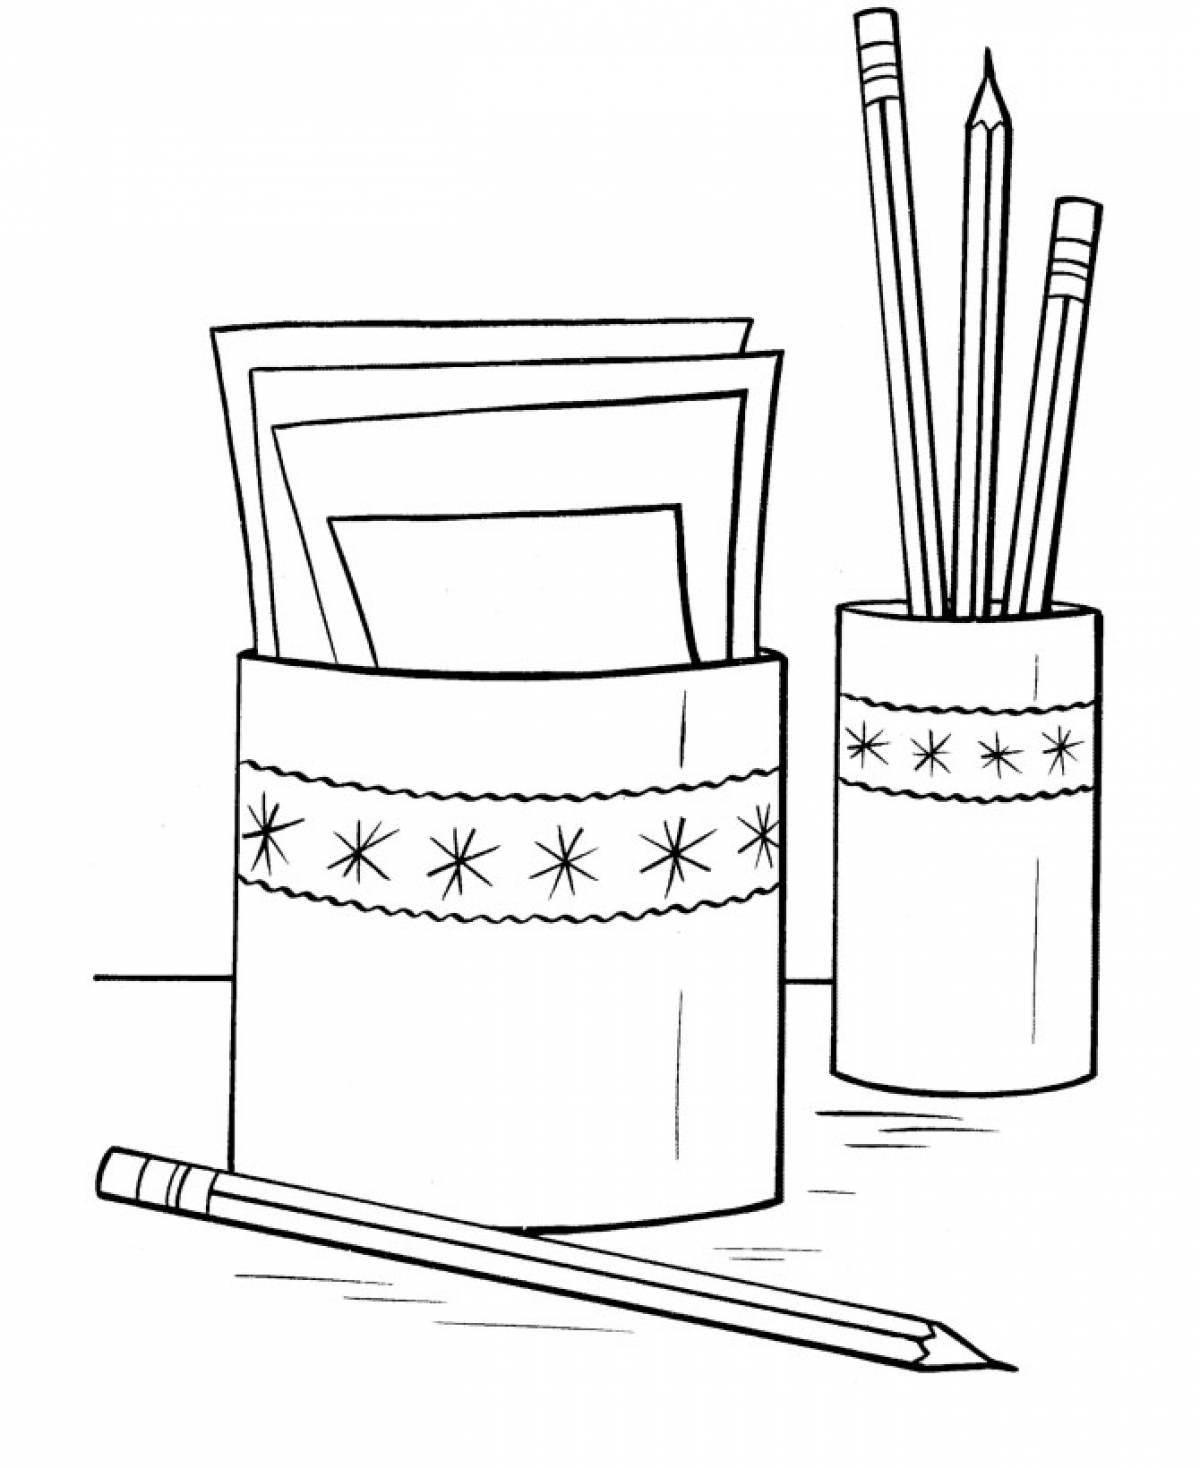 Pencils in a stand